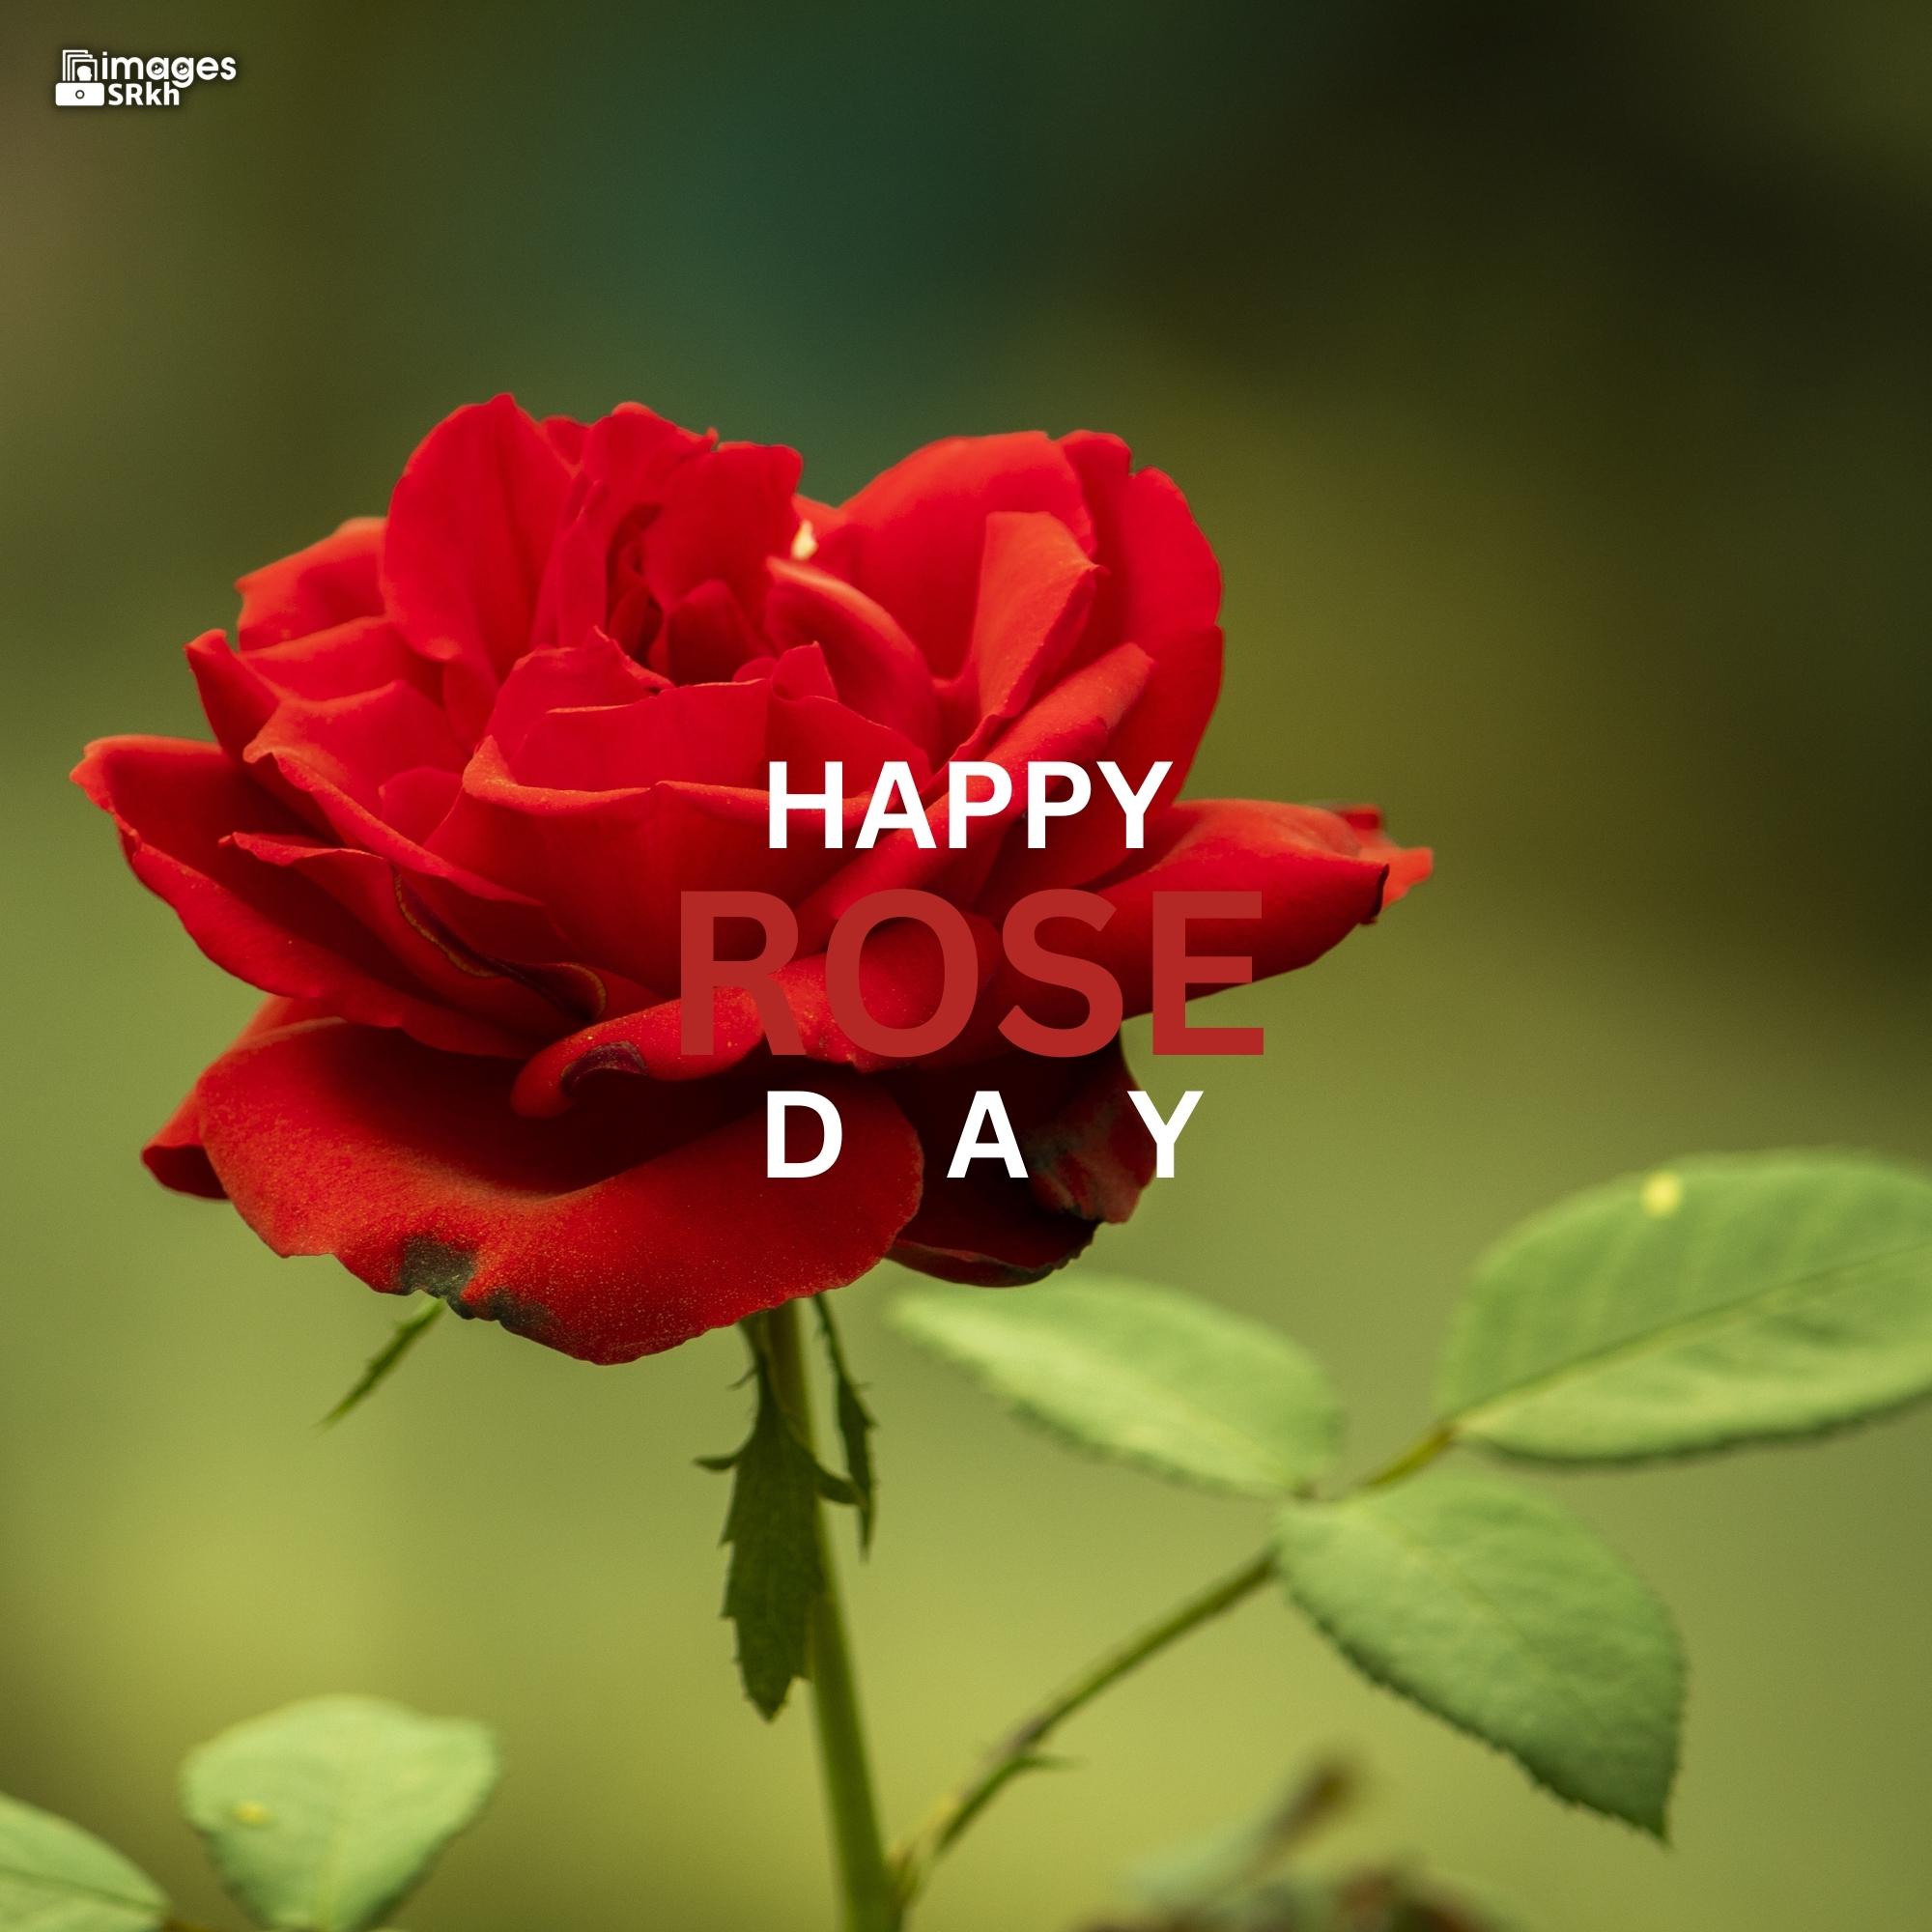 Happy Rose Day Image Hd Download (47)